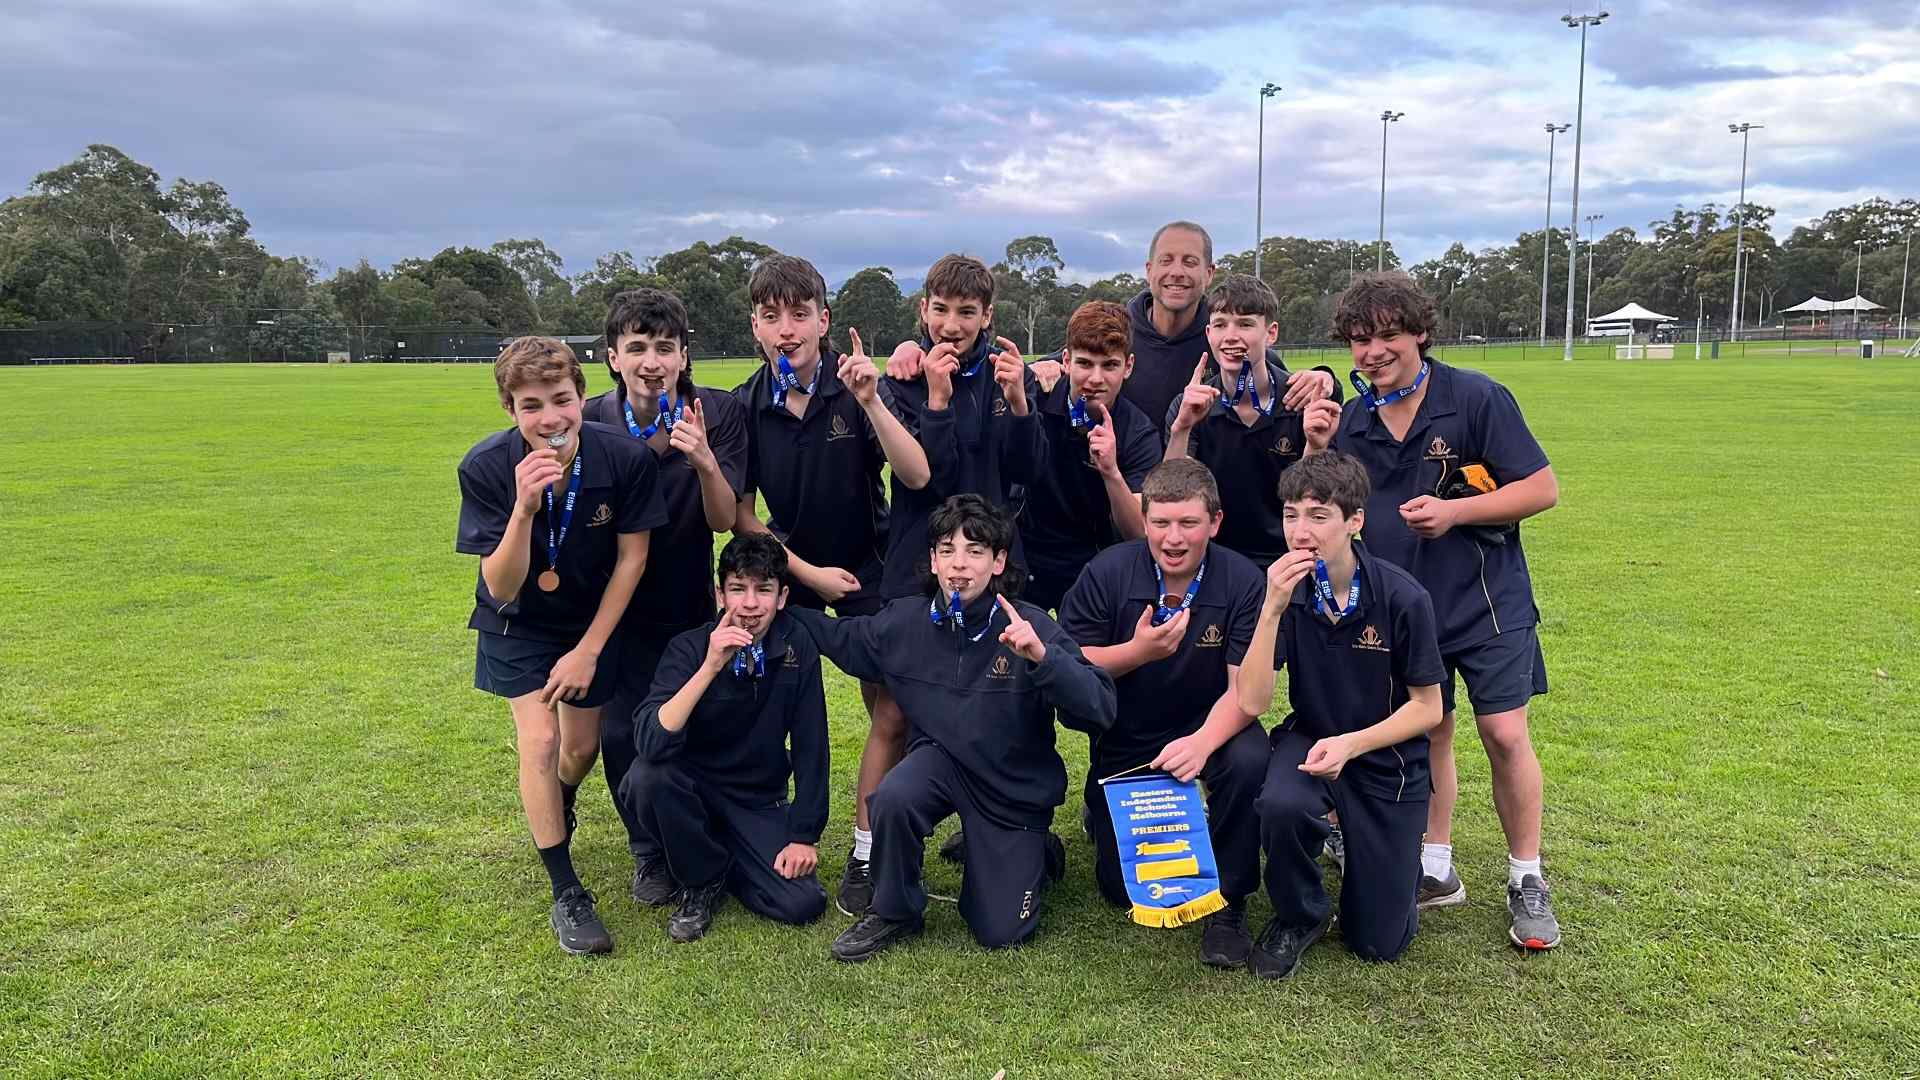 The Year 9 boys' softball team are smiling widely, grinning at the camera as they hold up or bite their gold medals. They are the 2023 EISM Softball champions.